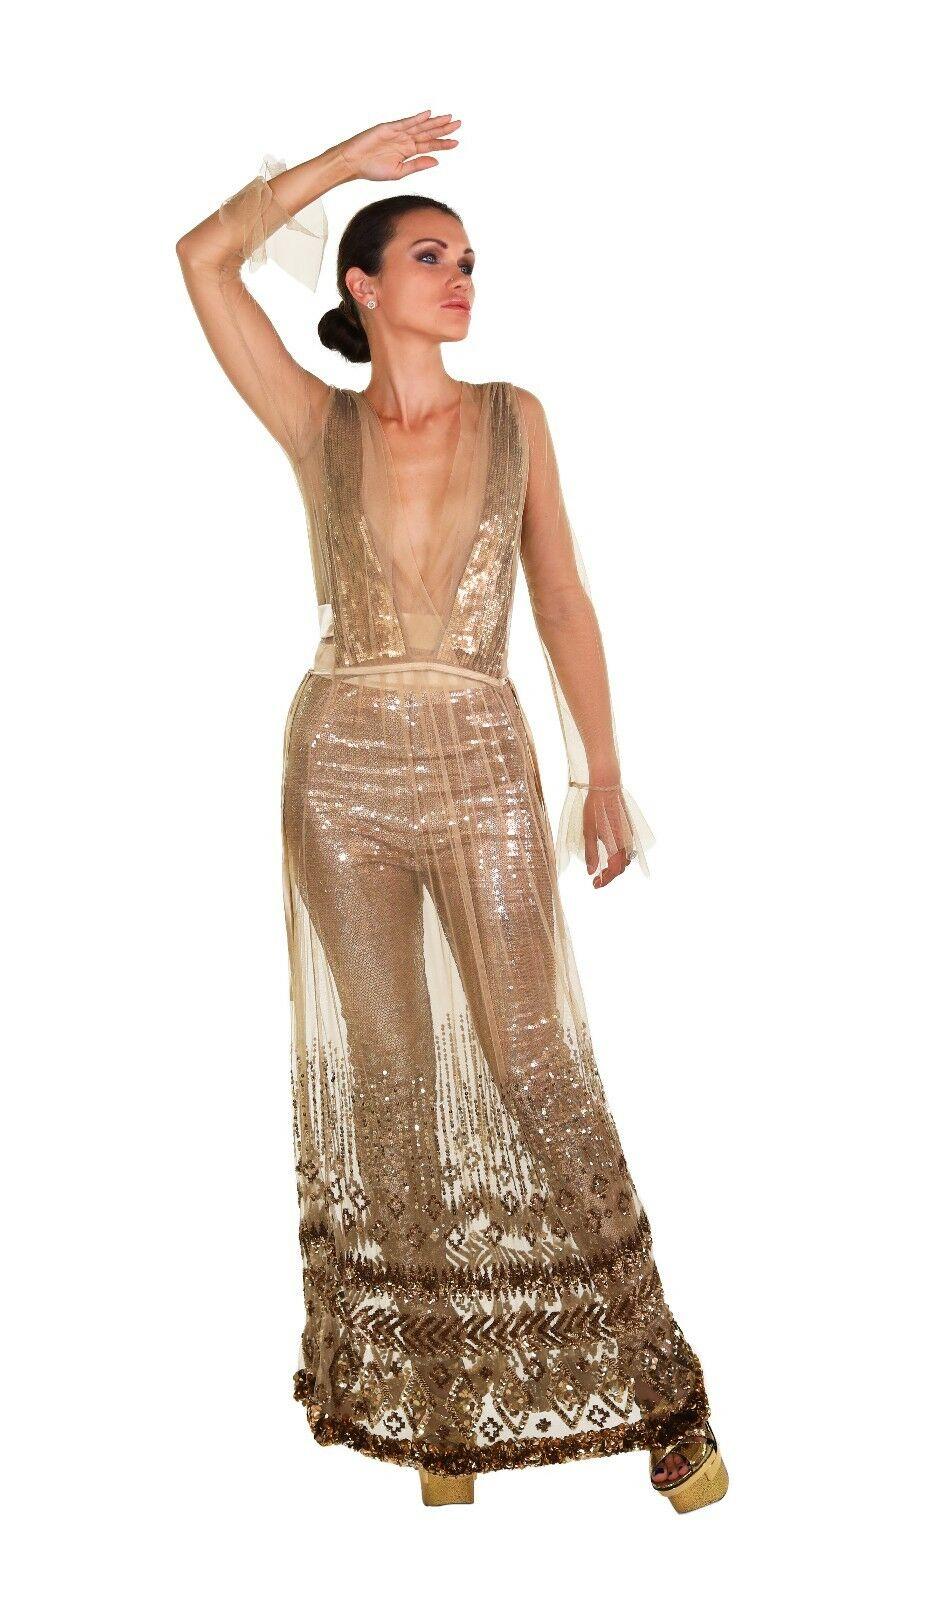 New TOM FORD NUDE EMBELLISHED CHIFFON DRESS w/ GOLD SEQUIN PANTS 38 - 2 6